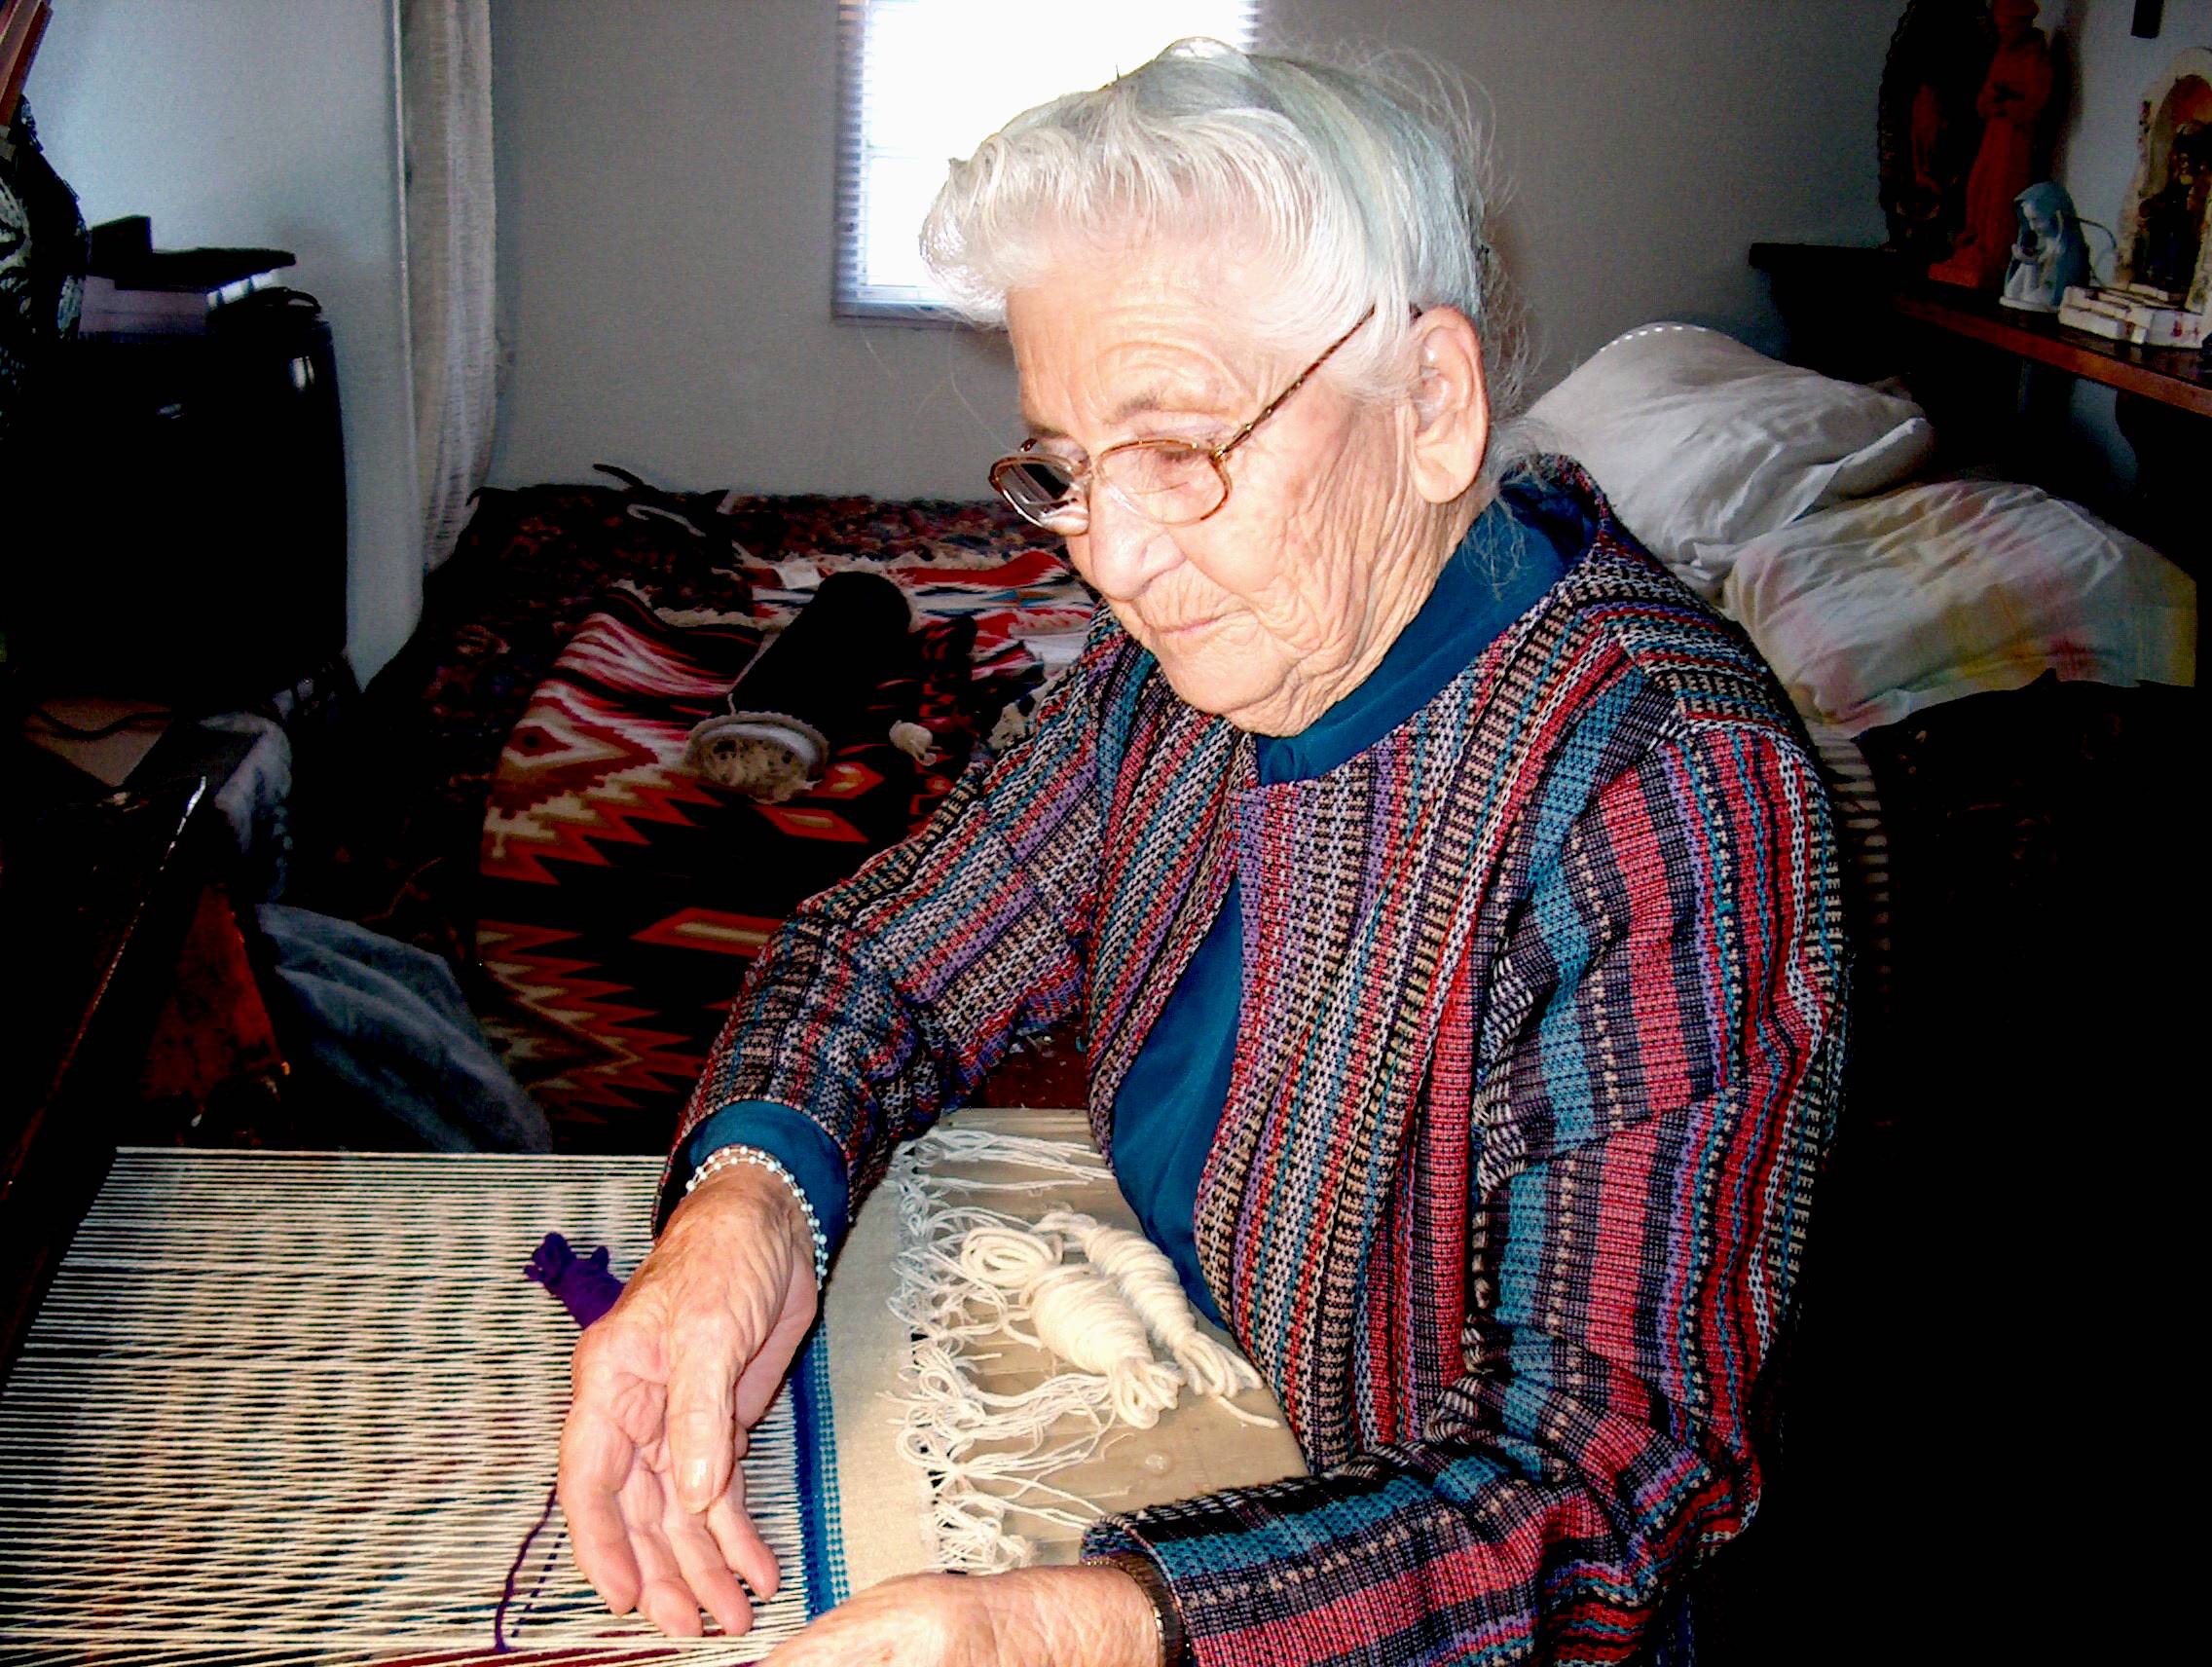 Photo of an older woman with white hair and eyeglasses, looking down at her weaving loom as she works. She is carefully lifting some of the threads as she weaves a piece of fabric that is white with a bright turquoise horizontal stripe.